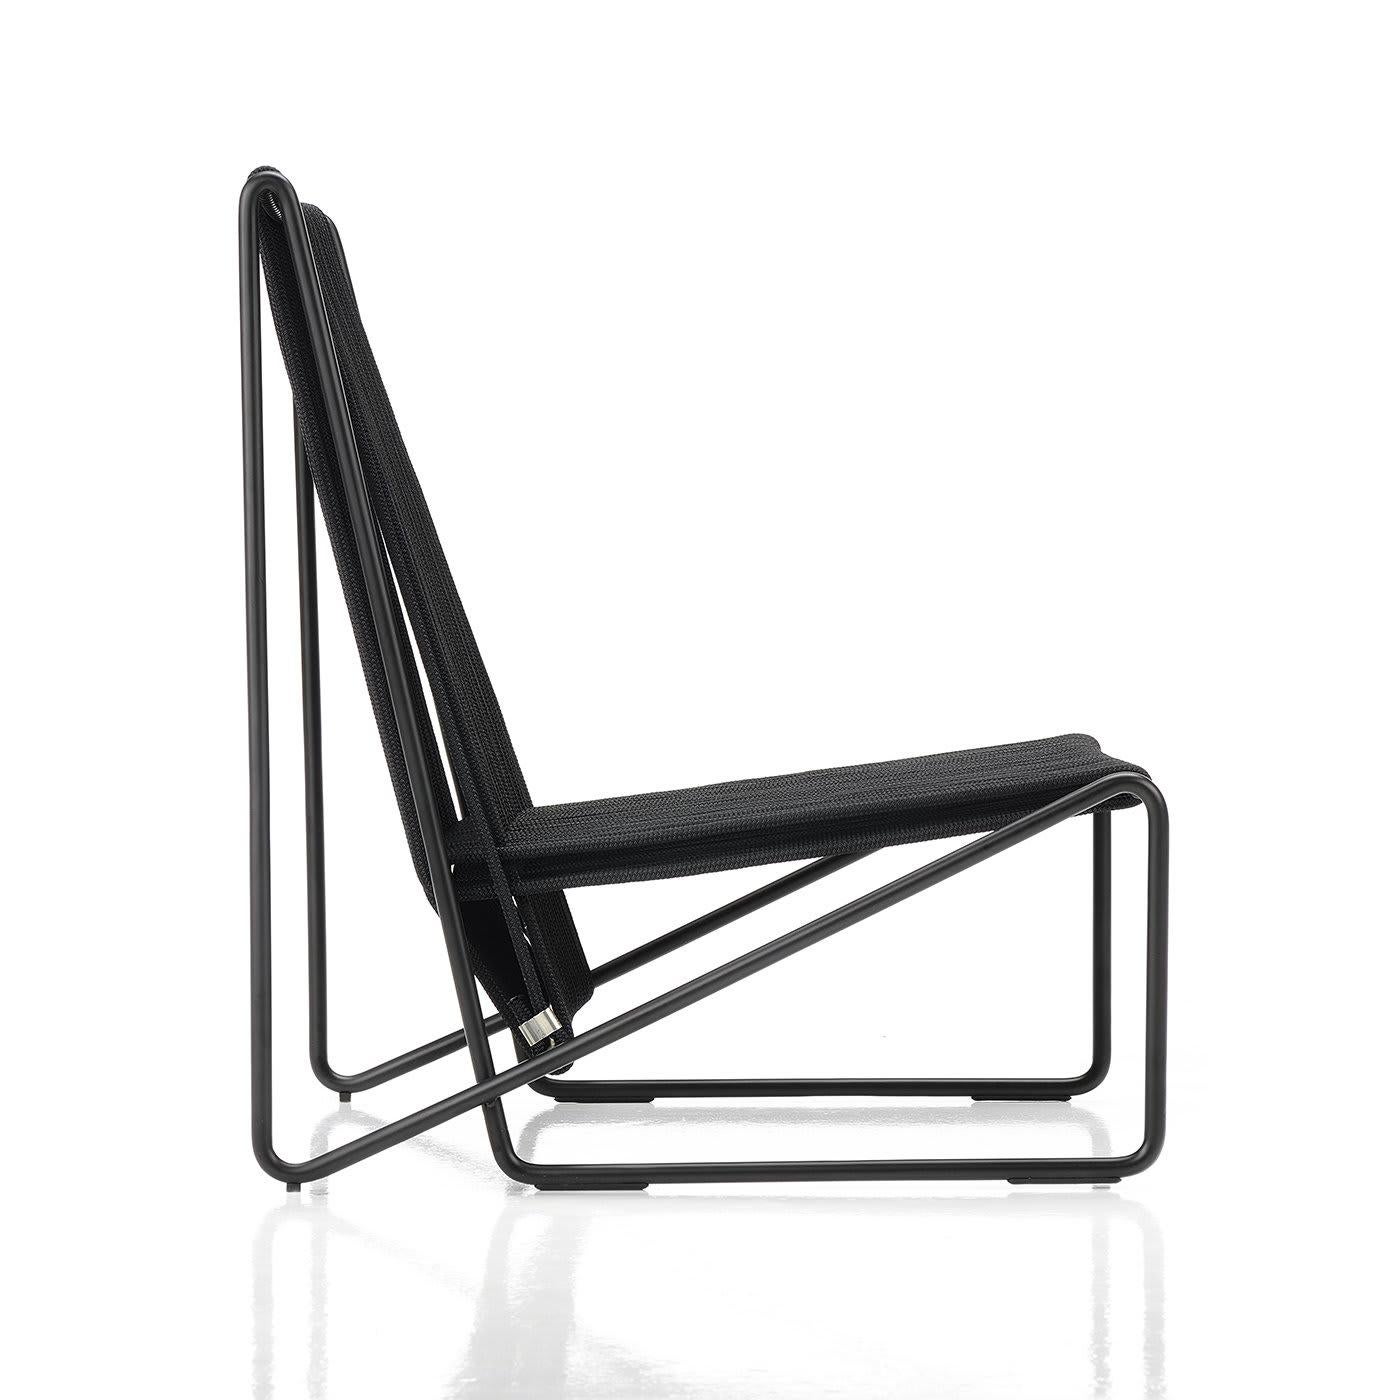 This lounge chair is made from a galvanized-steel tubular structure that has been painted black. Its seat and back are covered in woven black nautical rope. The item sits low to the ground and features a slightly inclined back, making it perfect for